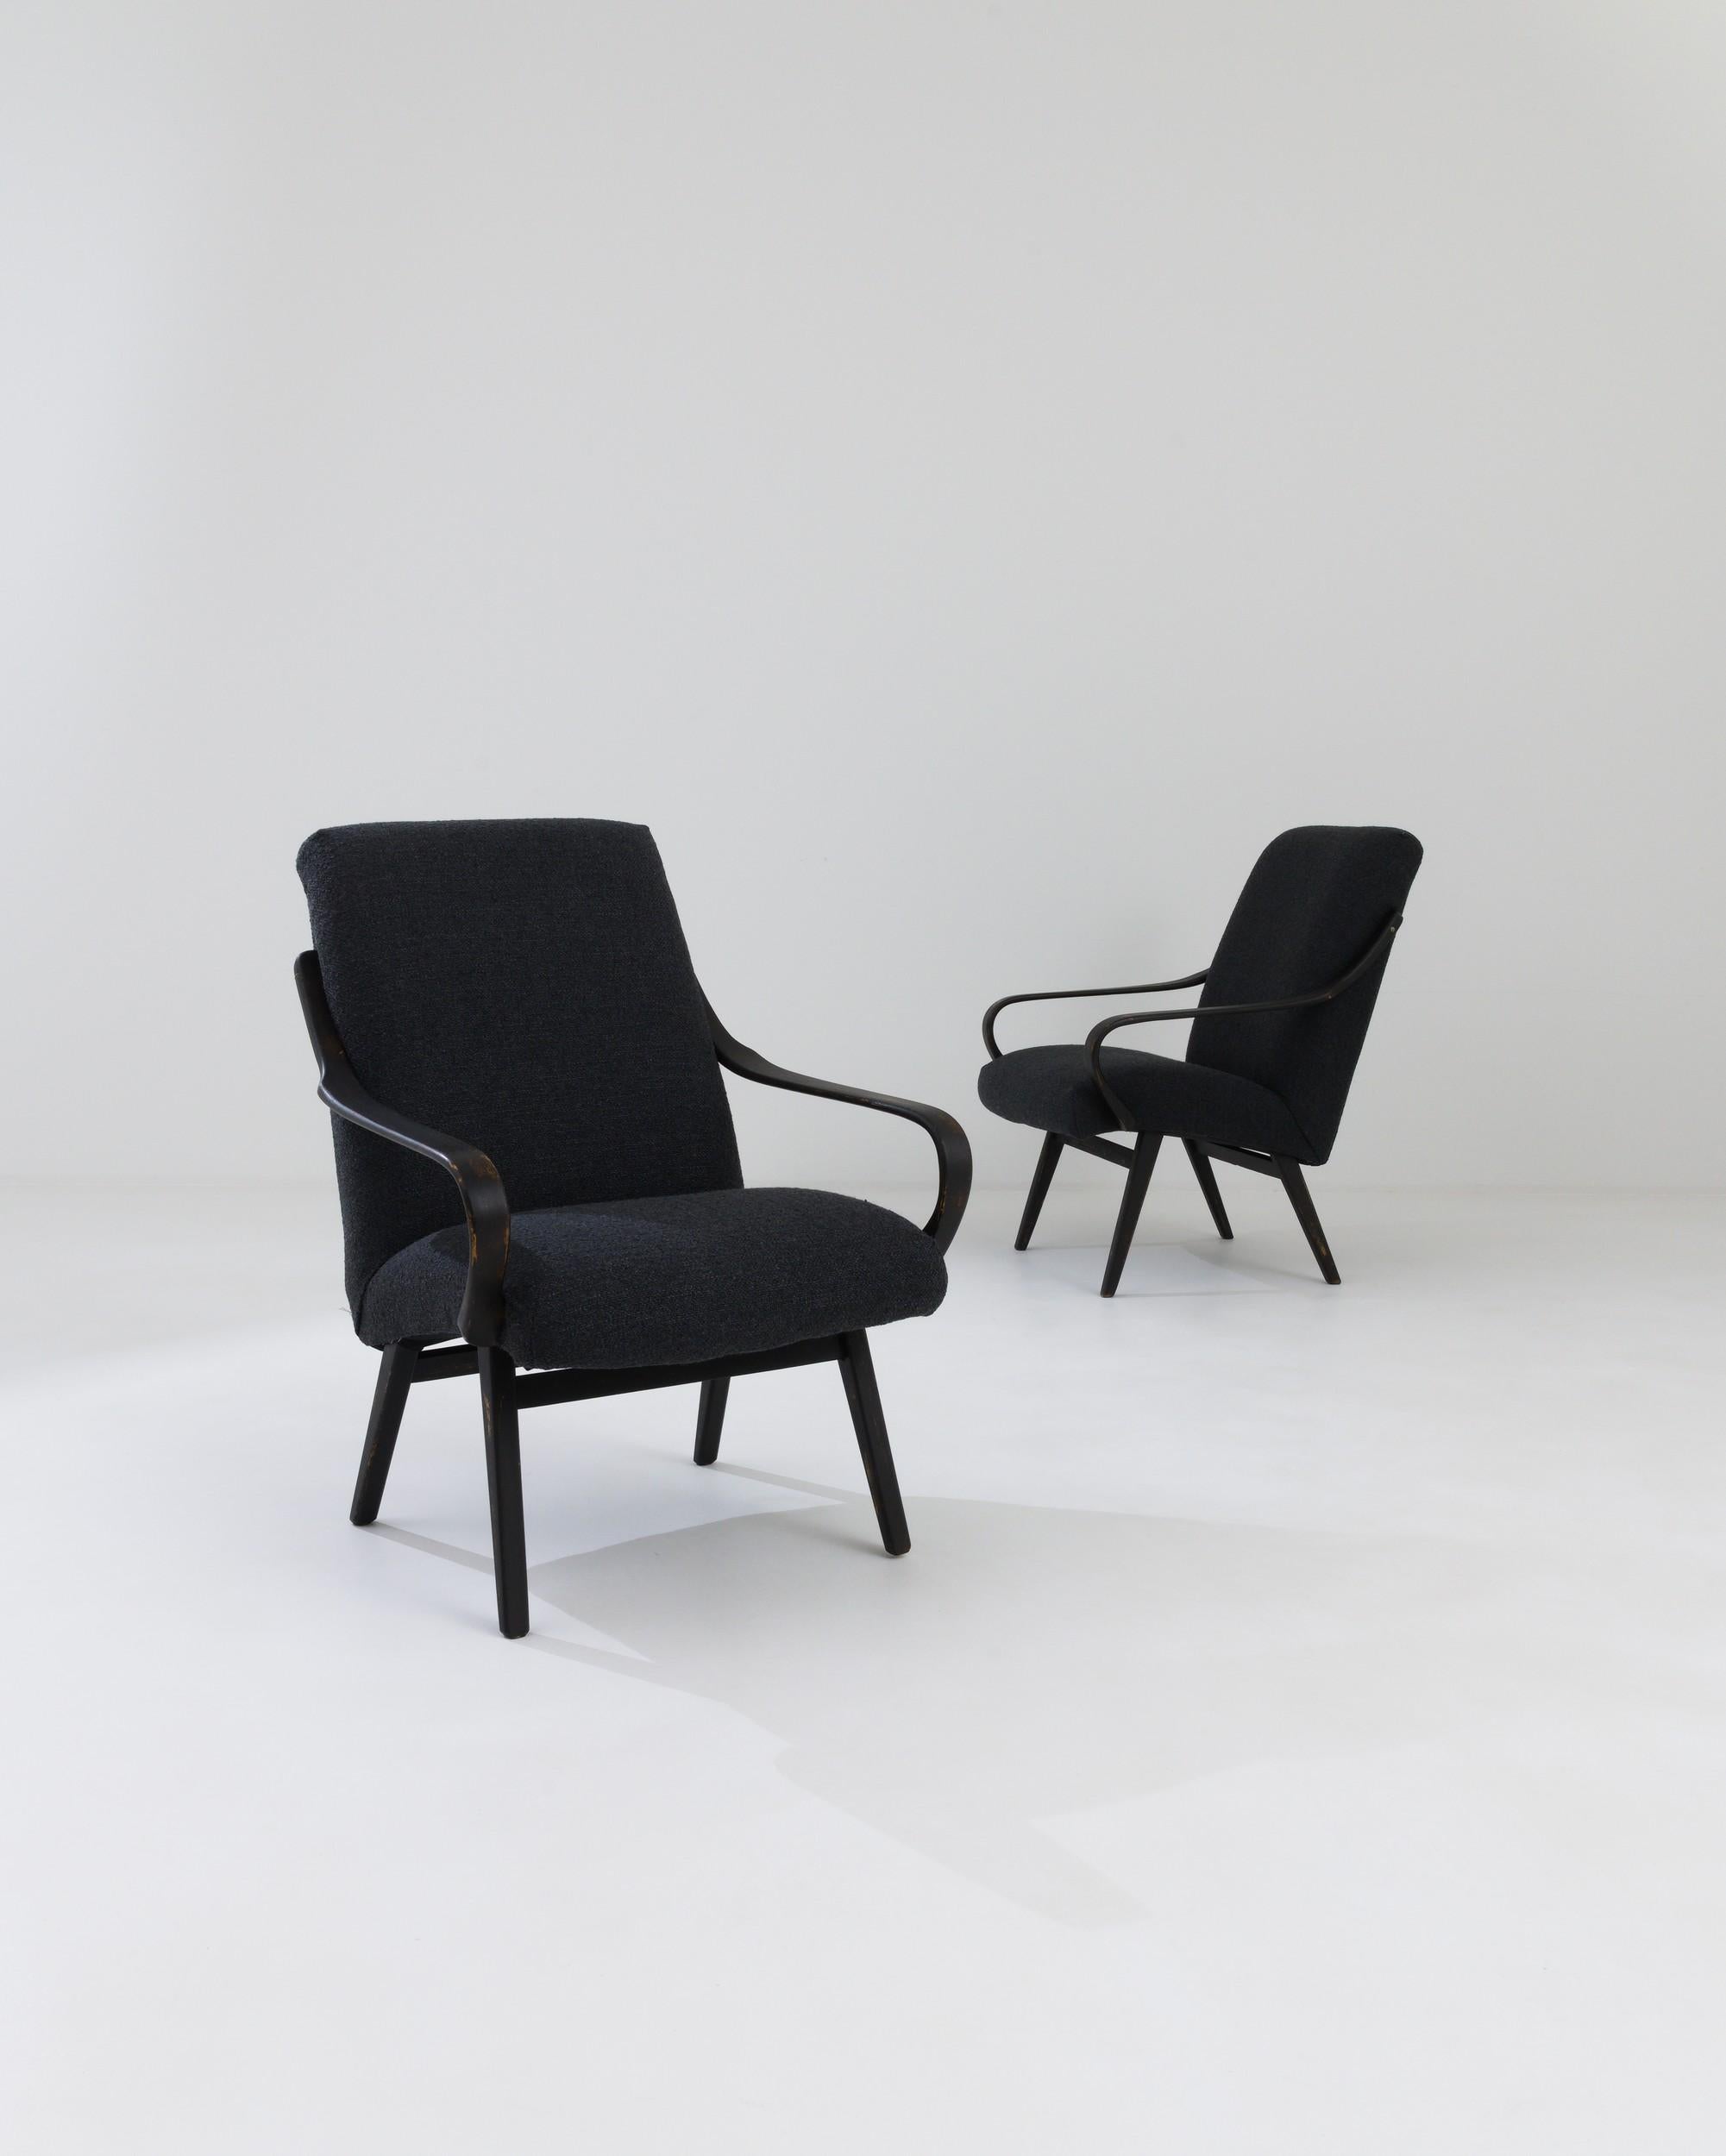 Eliciting a futuristic ambiance with their sleek, flowing contours, this pair of Czech armchairs was designed in the 1960s and produced by the illustrious firm, TON. The smoothly curved armrests engage in an aesthetic dialogue with the